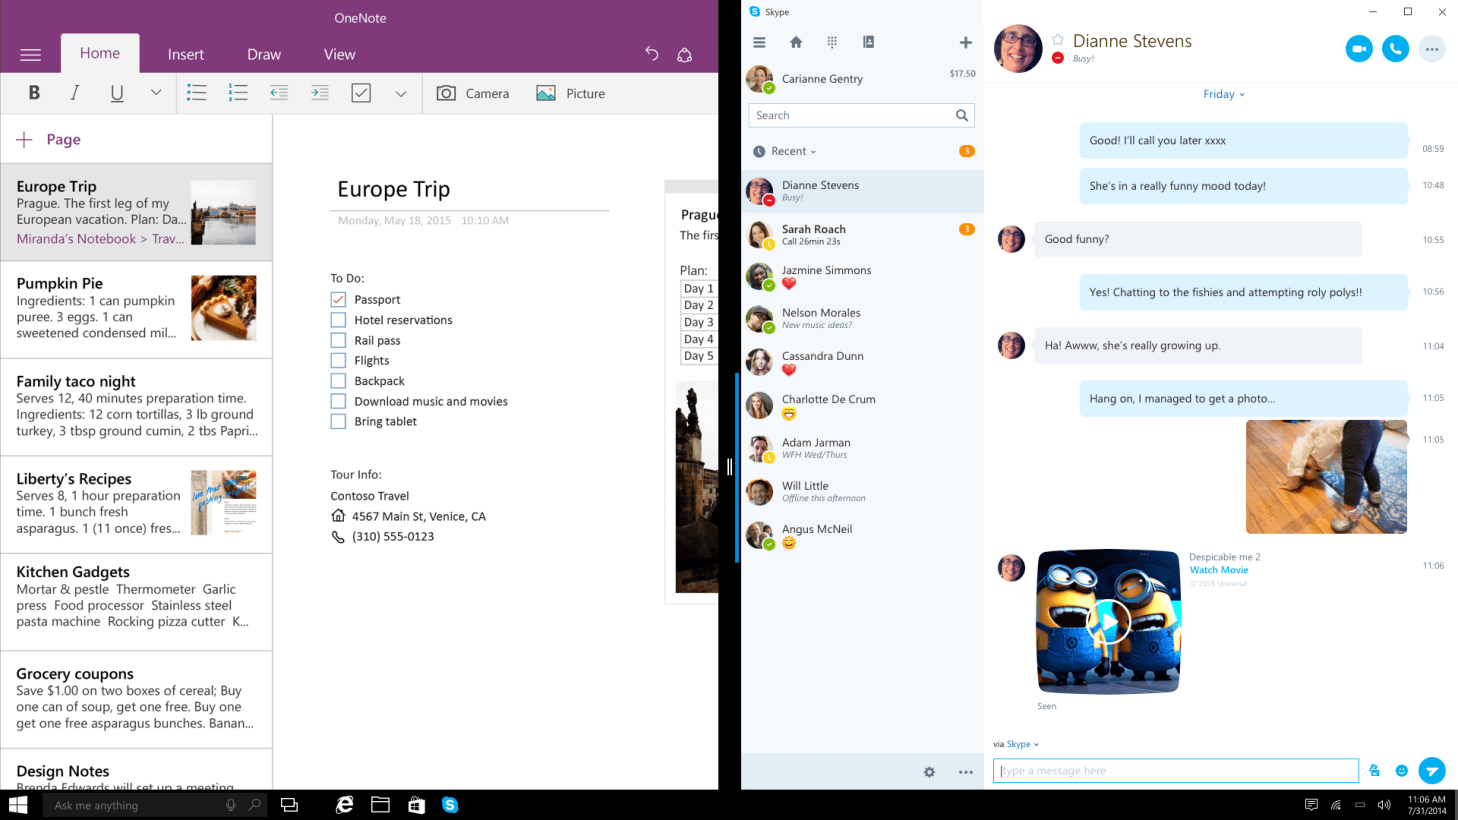 As a UWP app, the new Skype for Windows 10 can adjust to a variety of screen sizes and form factors.